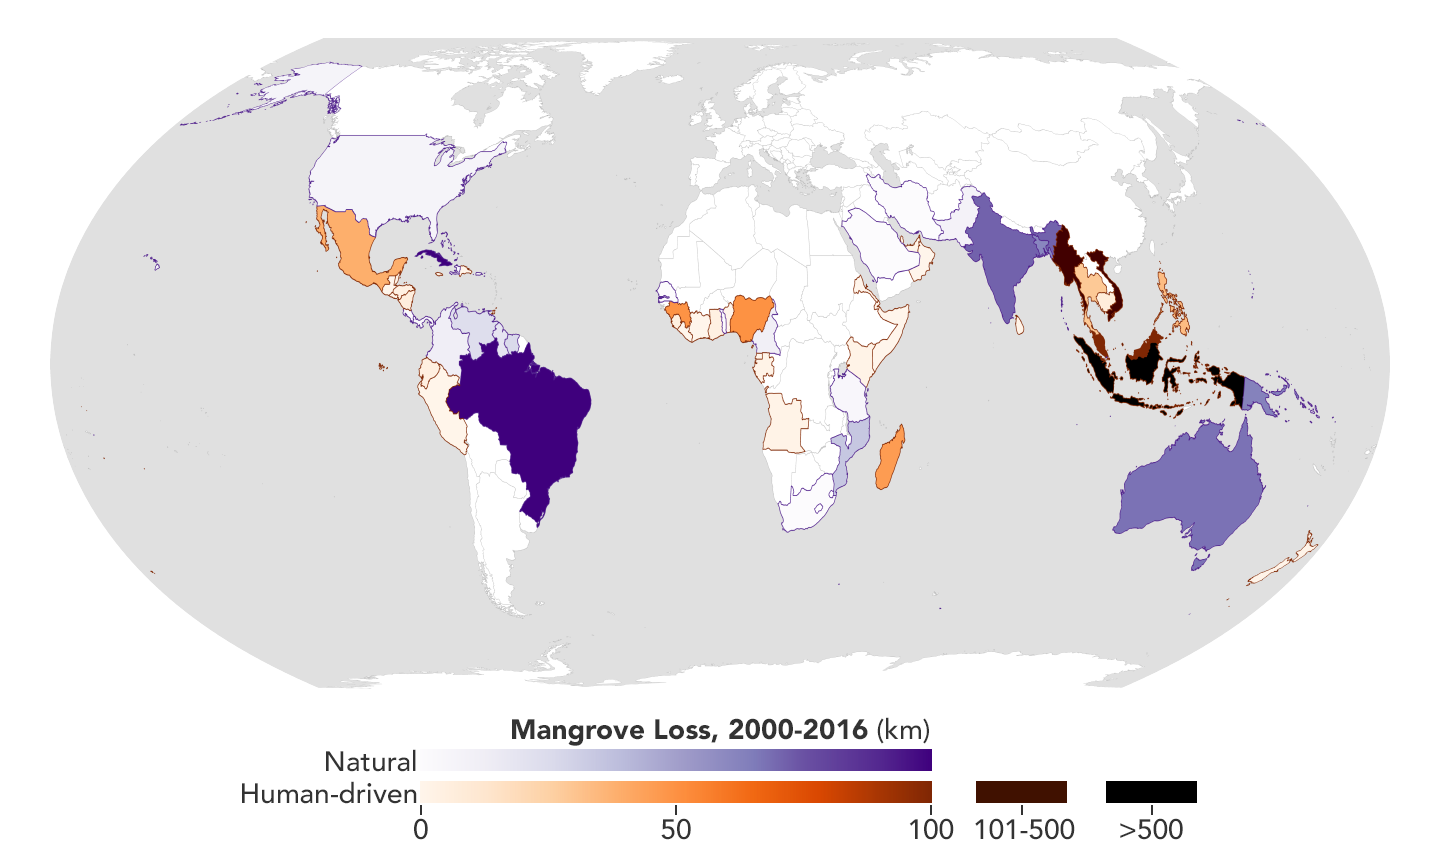 Global map of natural and human-caused mangrove loss from 2000-2016